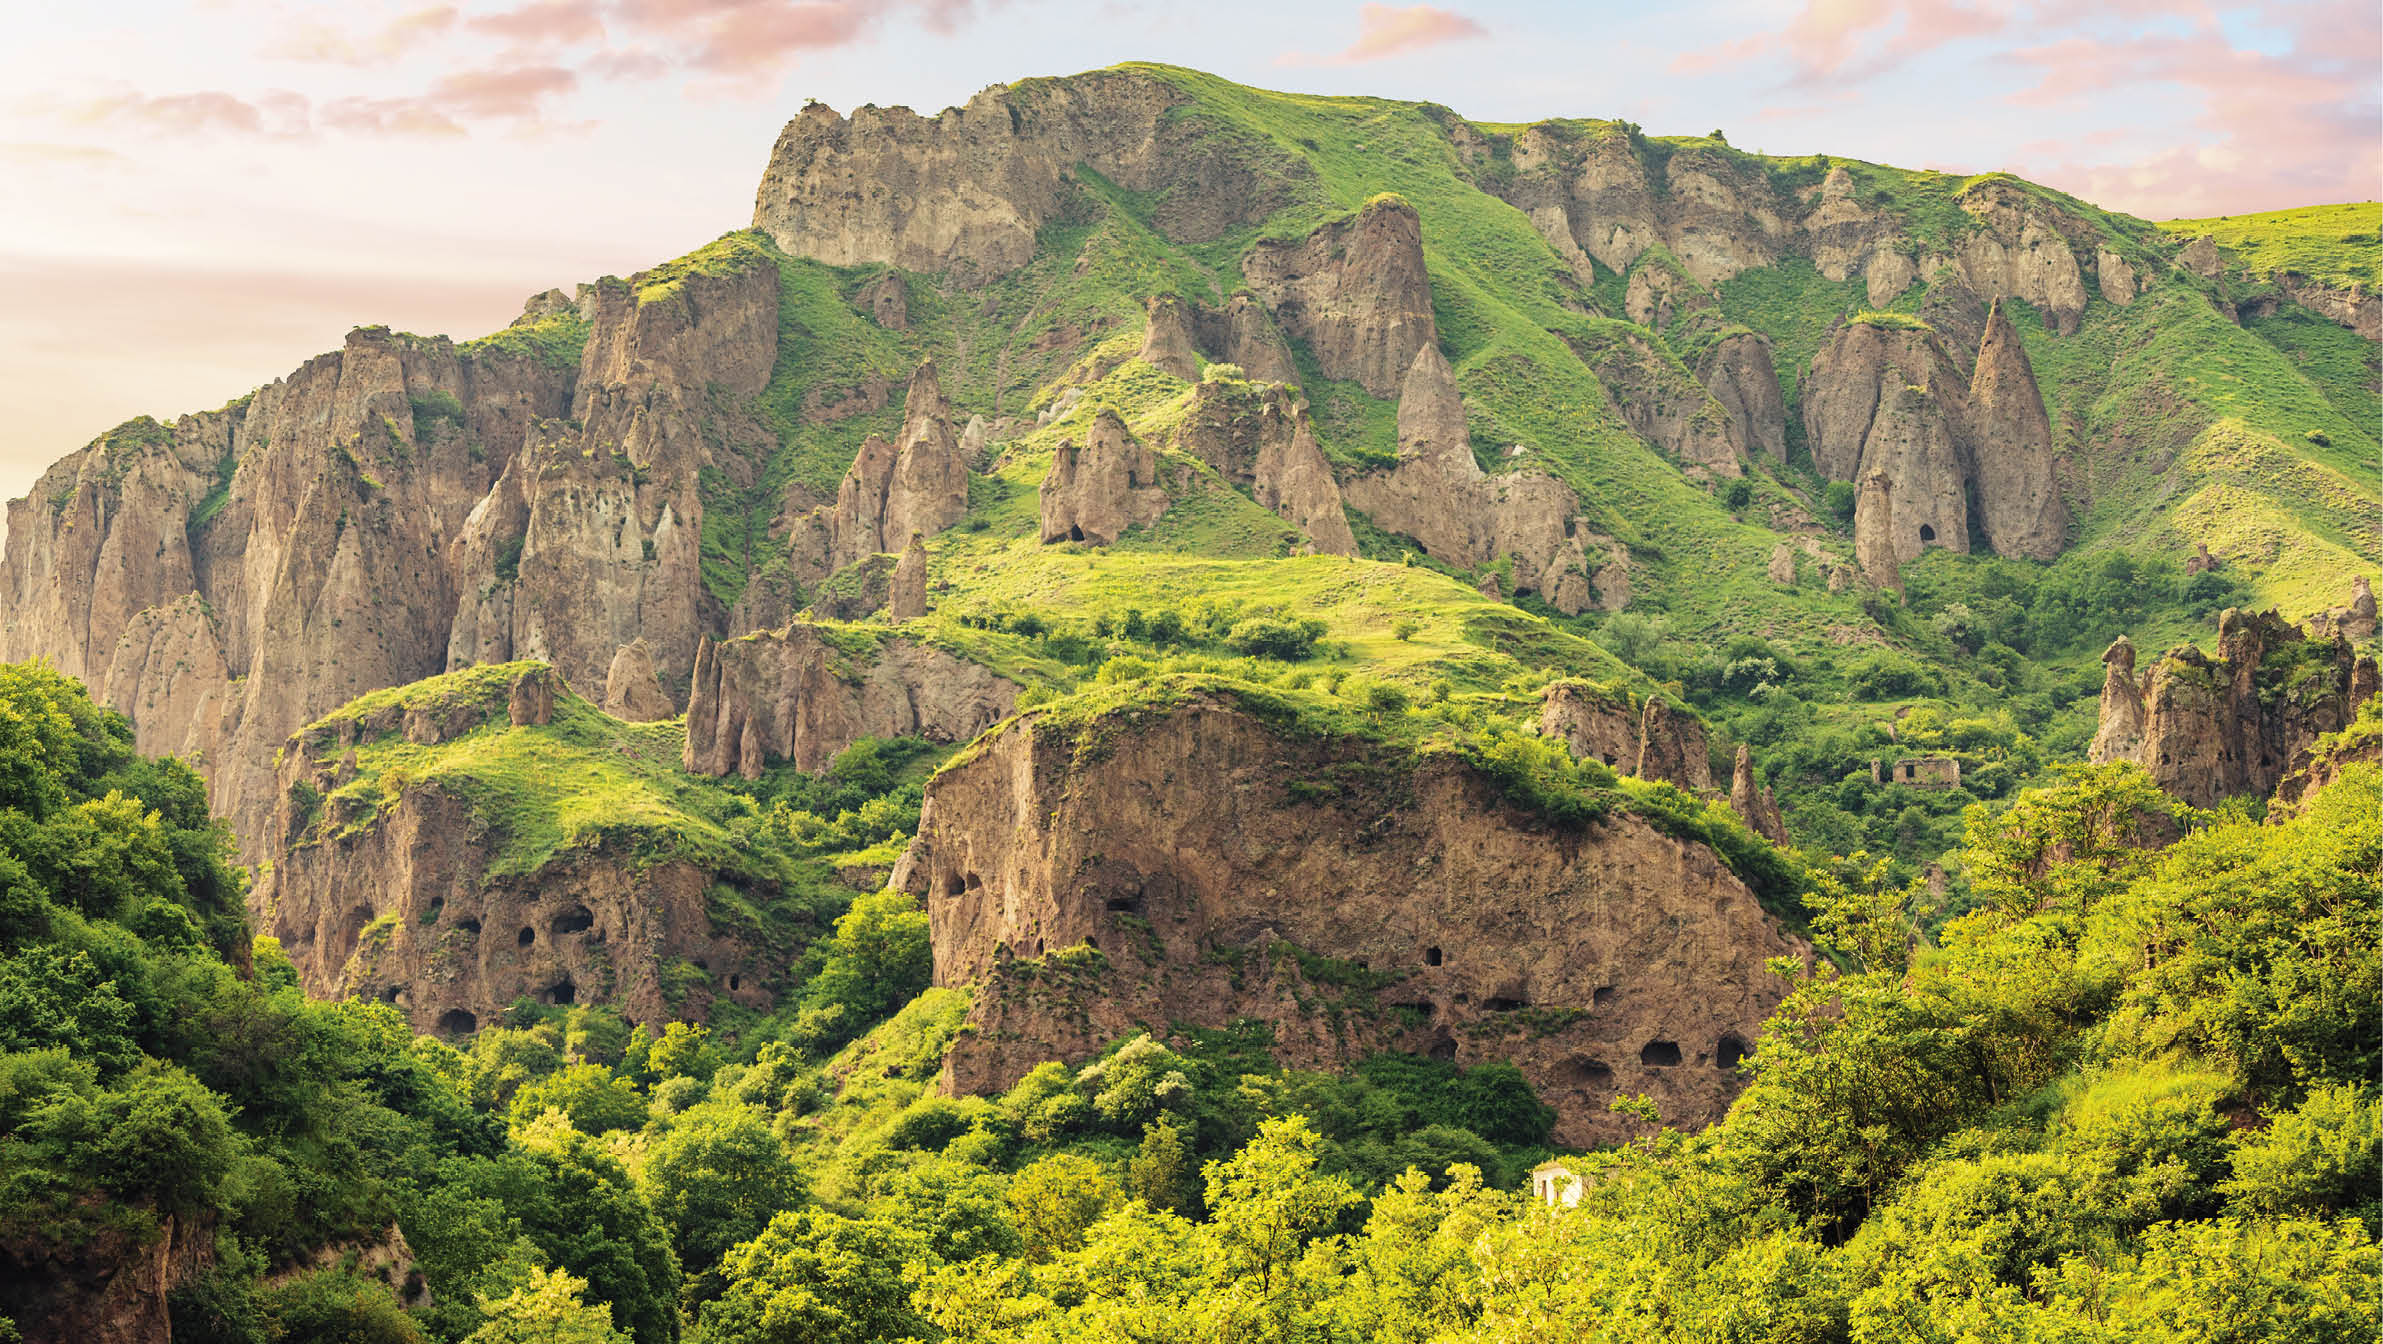 A view of the ancient cave city of Khndzoresk in Armenia is a popular tourist and historical destination for tourism and explore